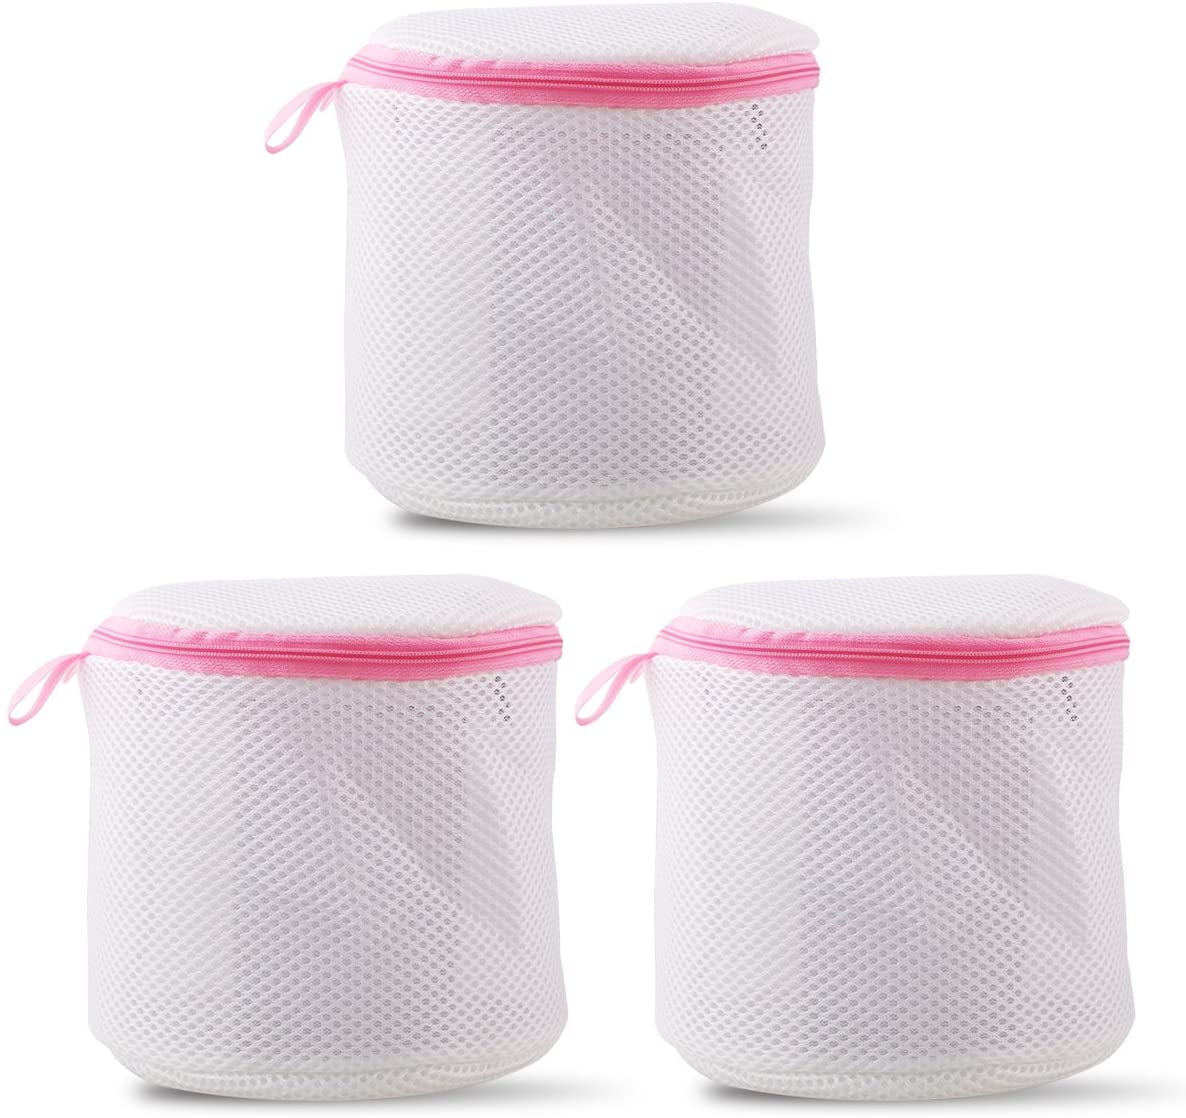 Professional  Bra Wash Bag For Lingerie & Underwear Washing chic TO WL 